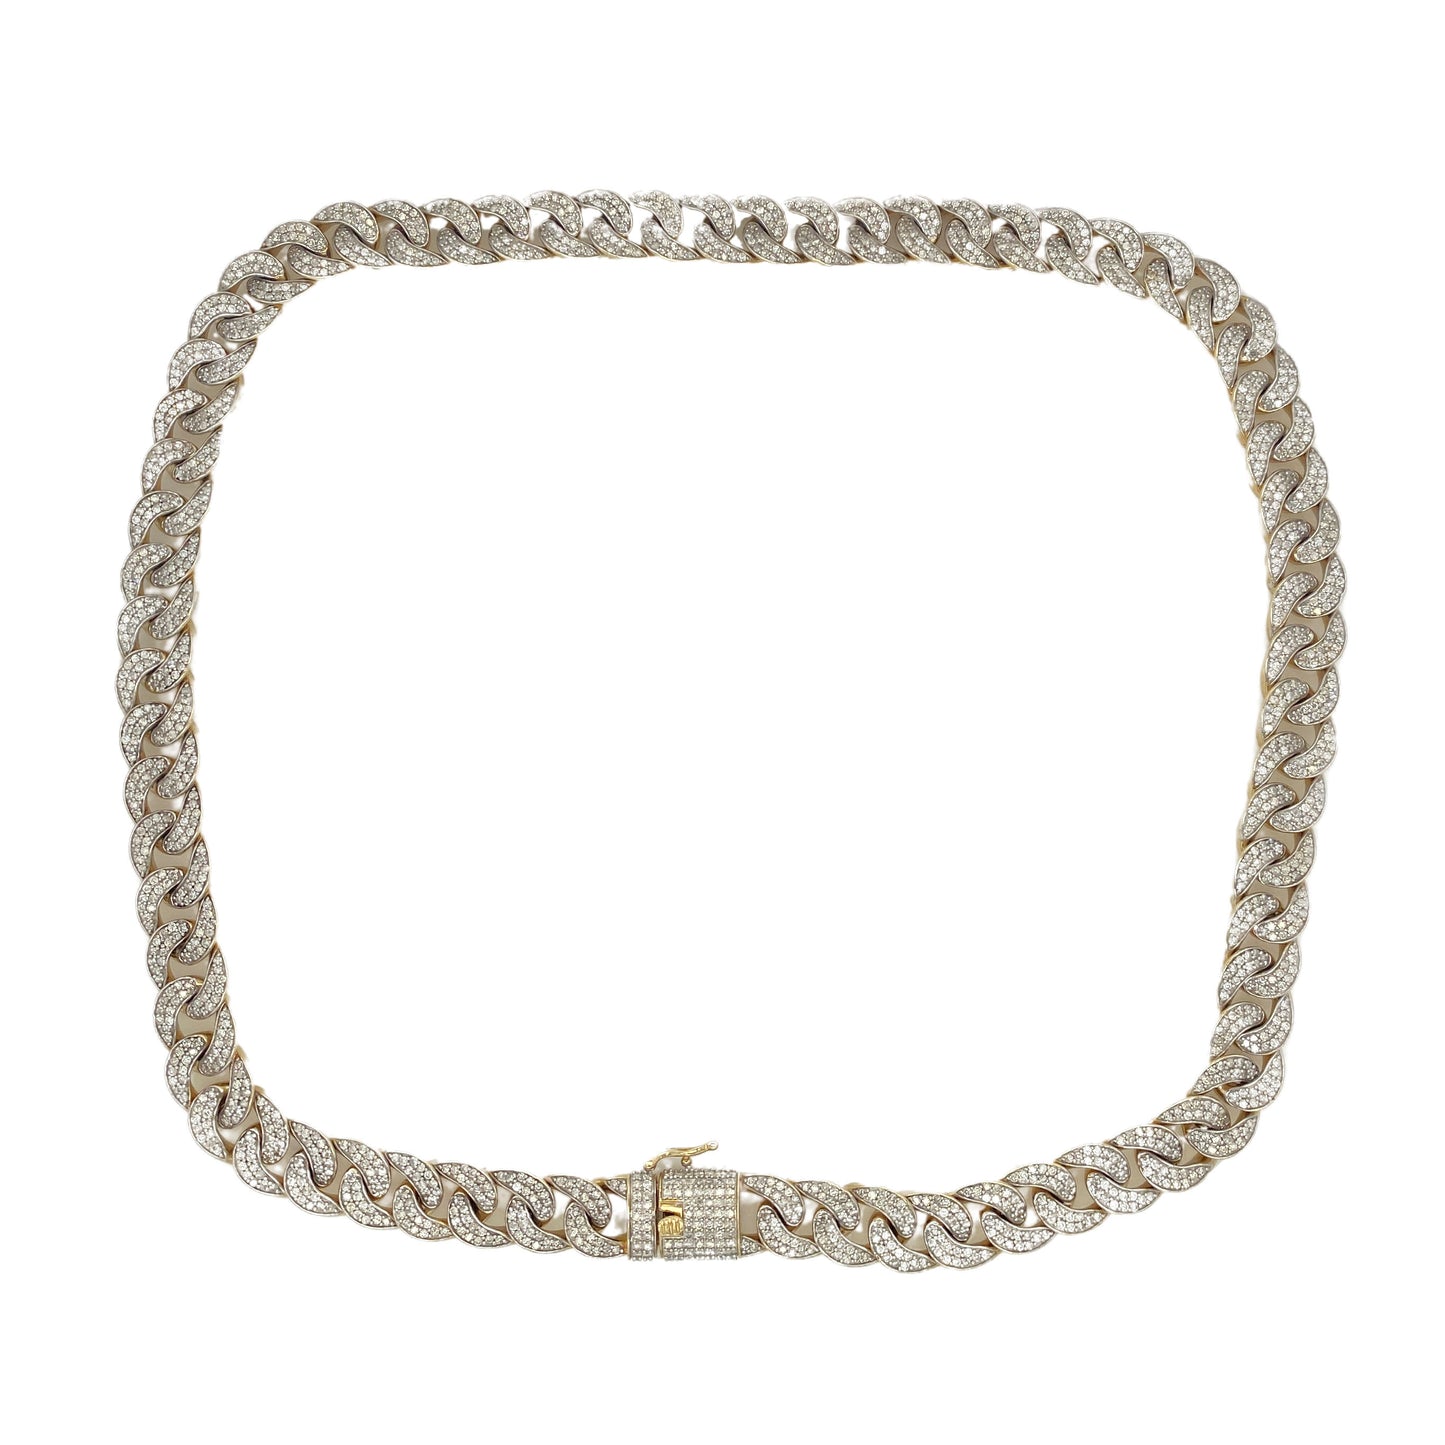 Circa 1990s 1.50 Carat Diamond Curb Link Chain Necklace in 10K Gold